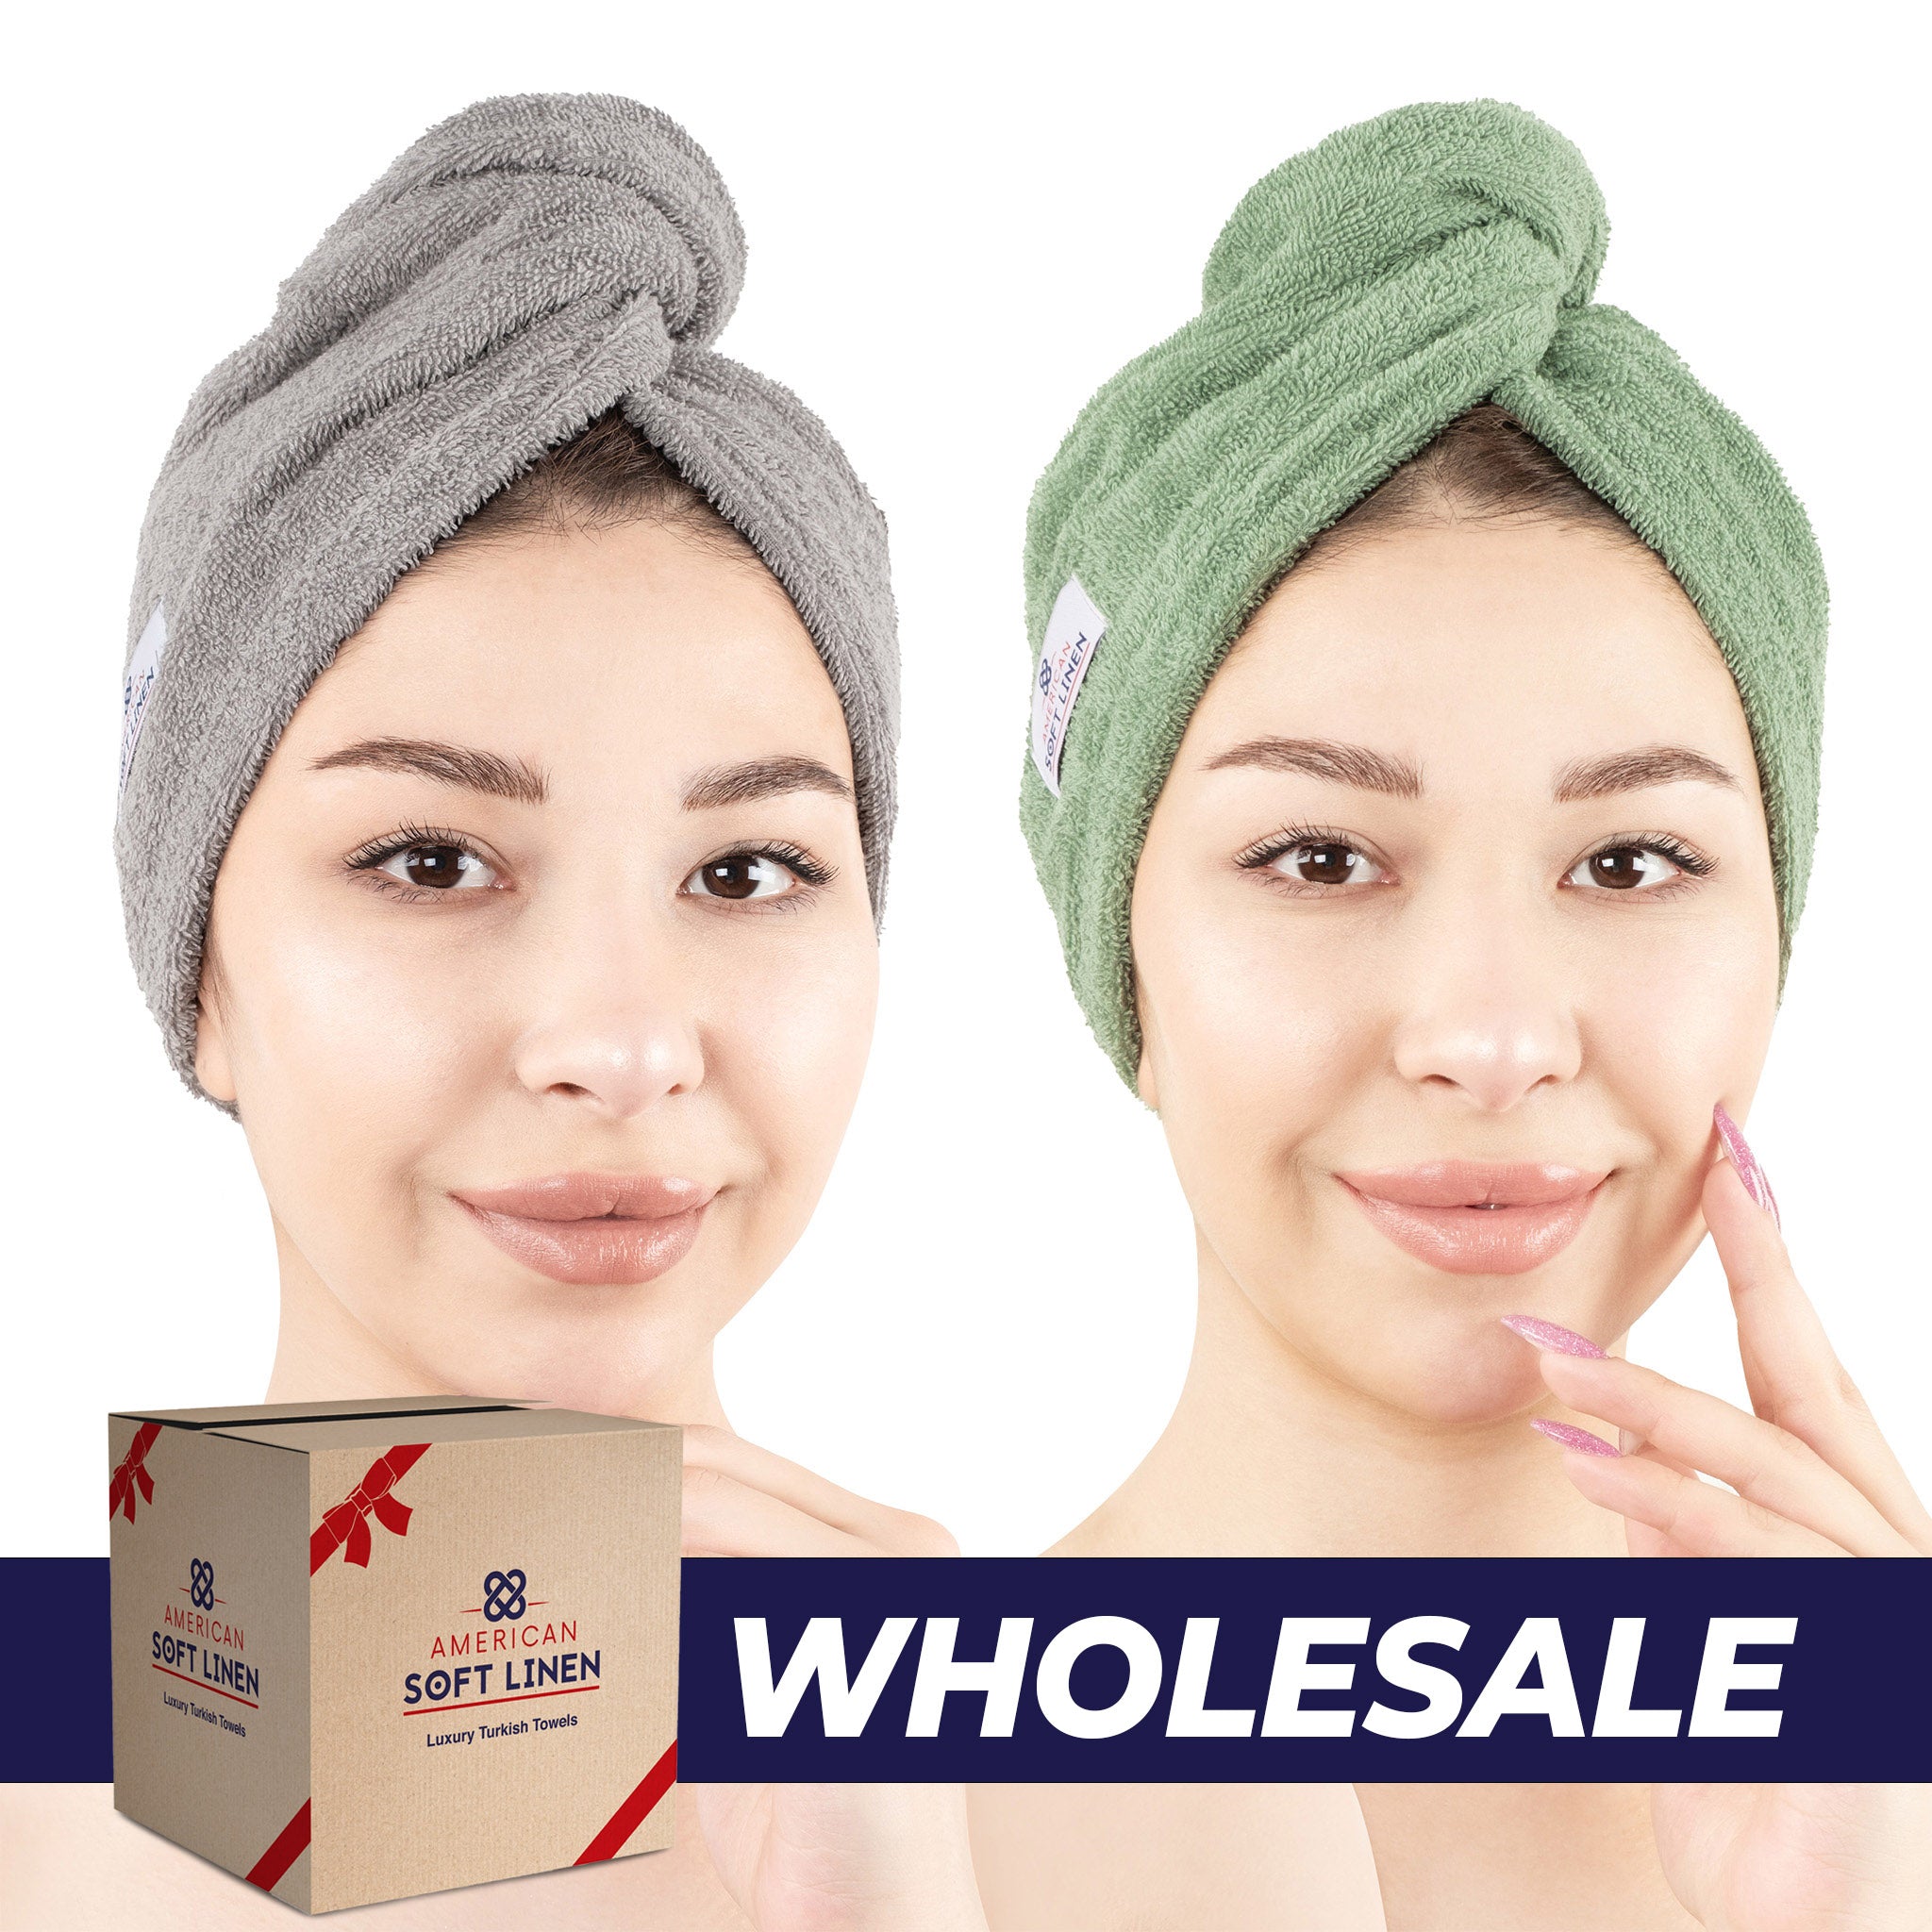 American Soft Linen 100% Cotton Hair Drying Towels for Women 2 pack 75 set case pack rockridge-sage green-0